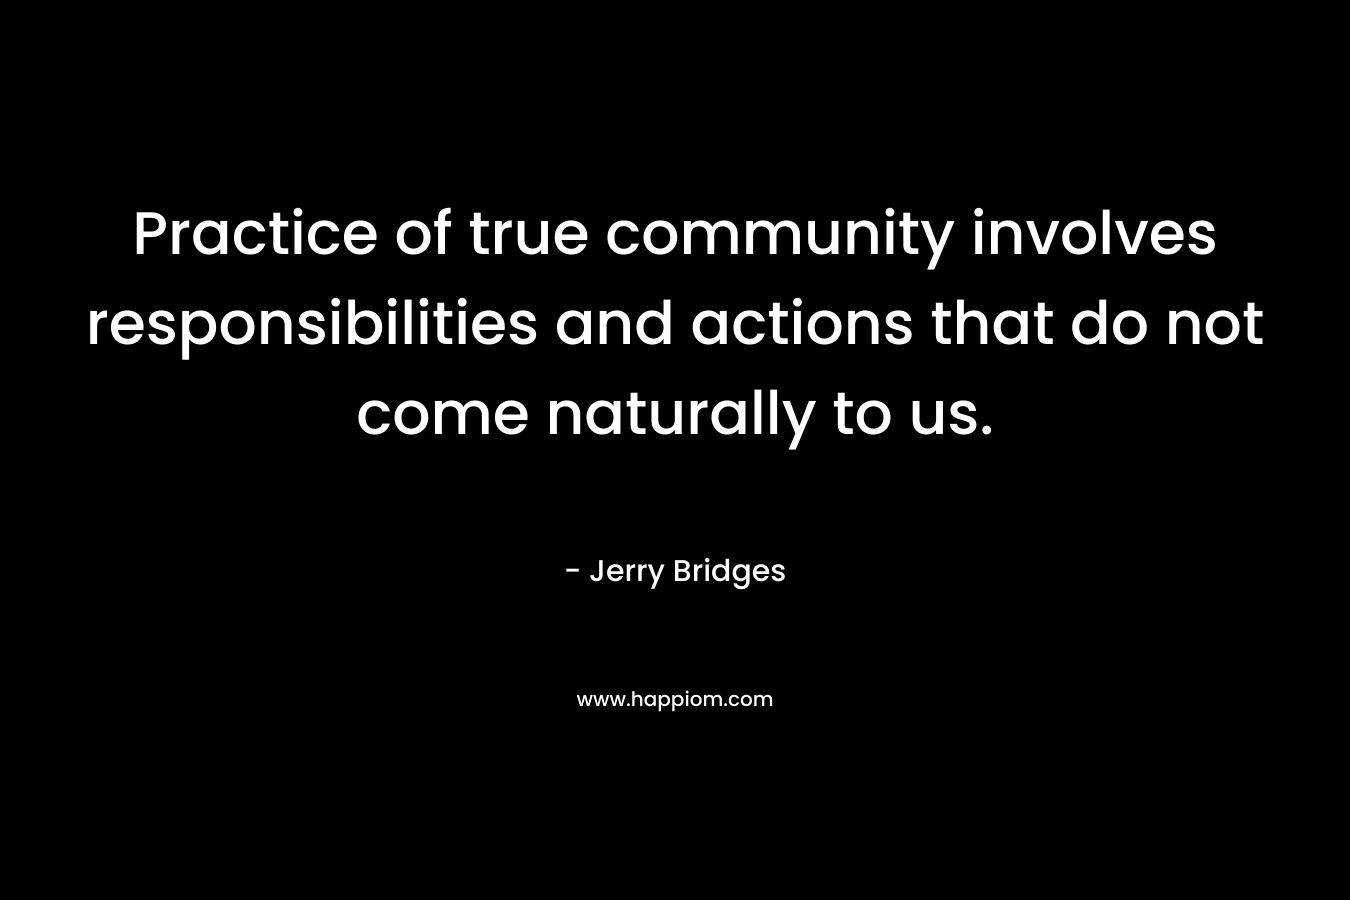 Practice of true community involves responsibilities and actions that do not come naturally to us. – Jerry Bridges